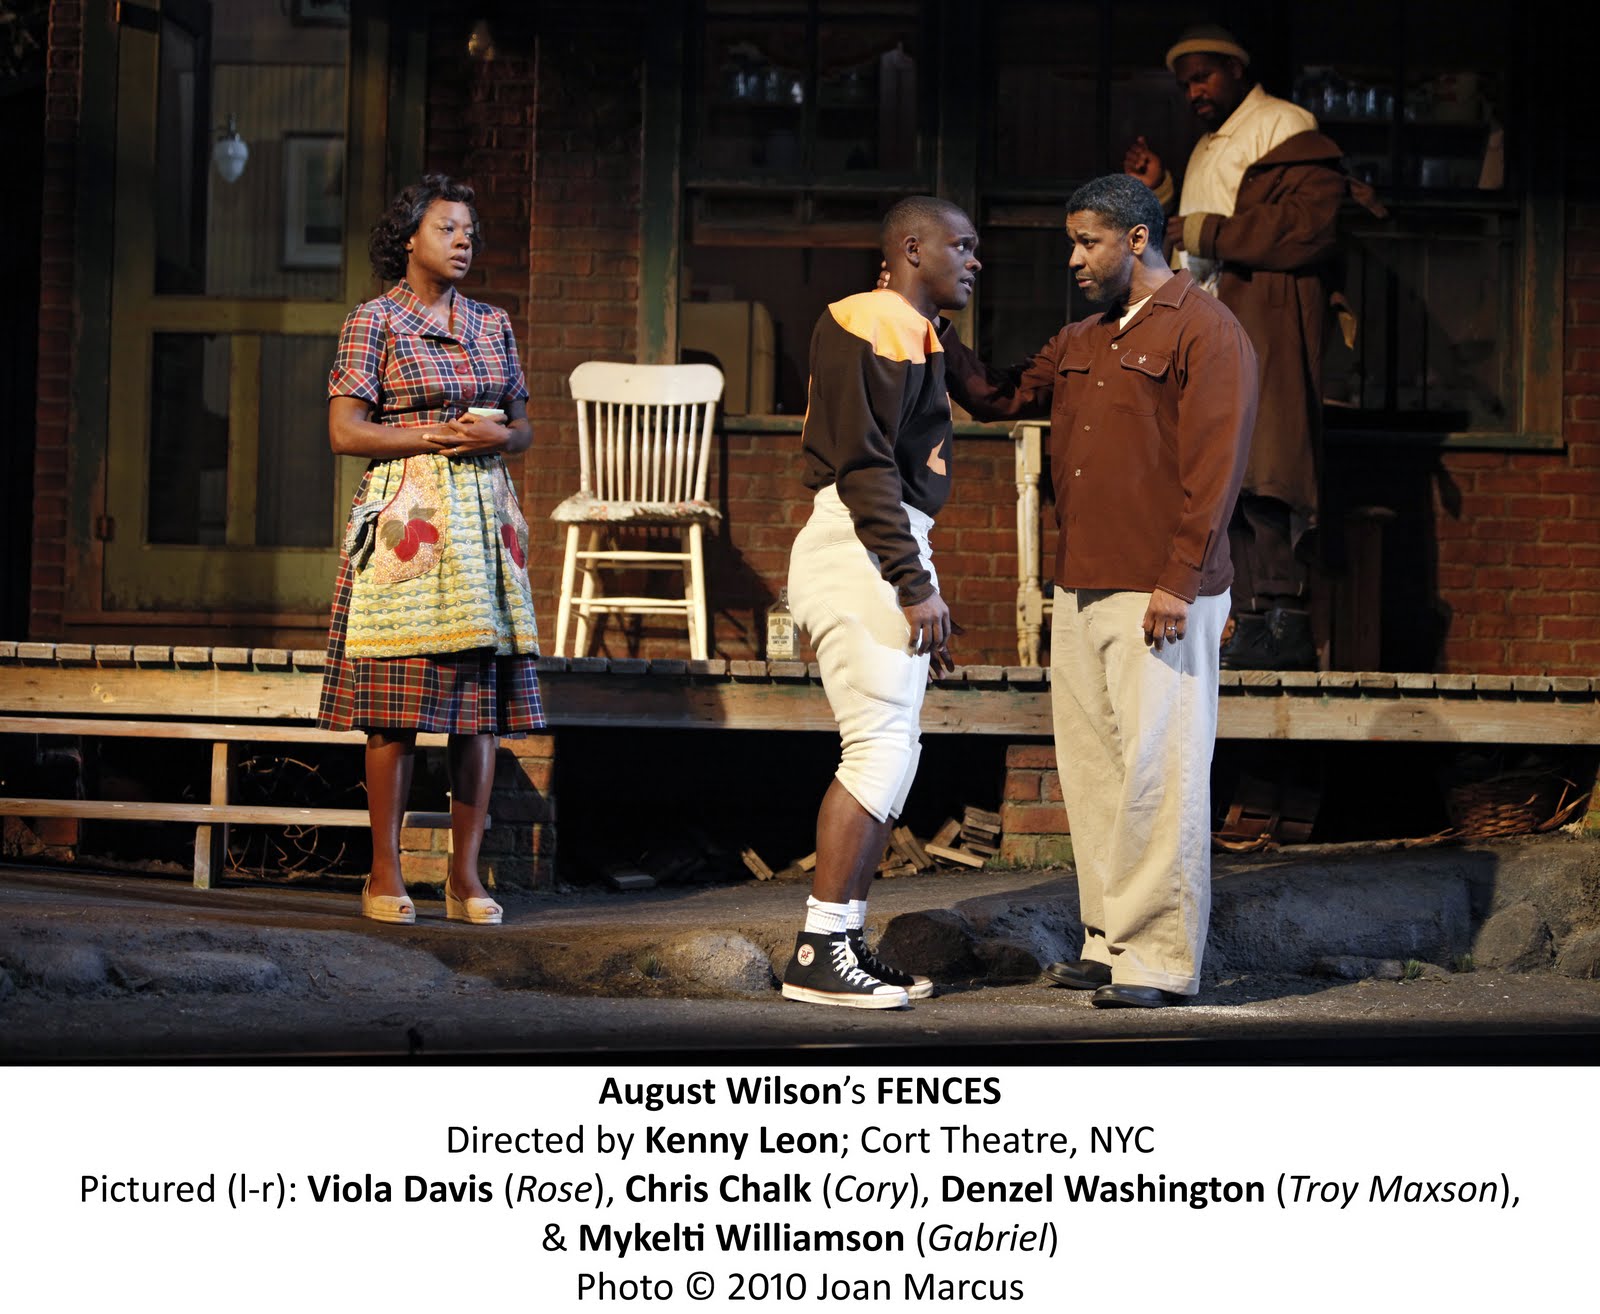 Fences by august wilson essay